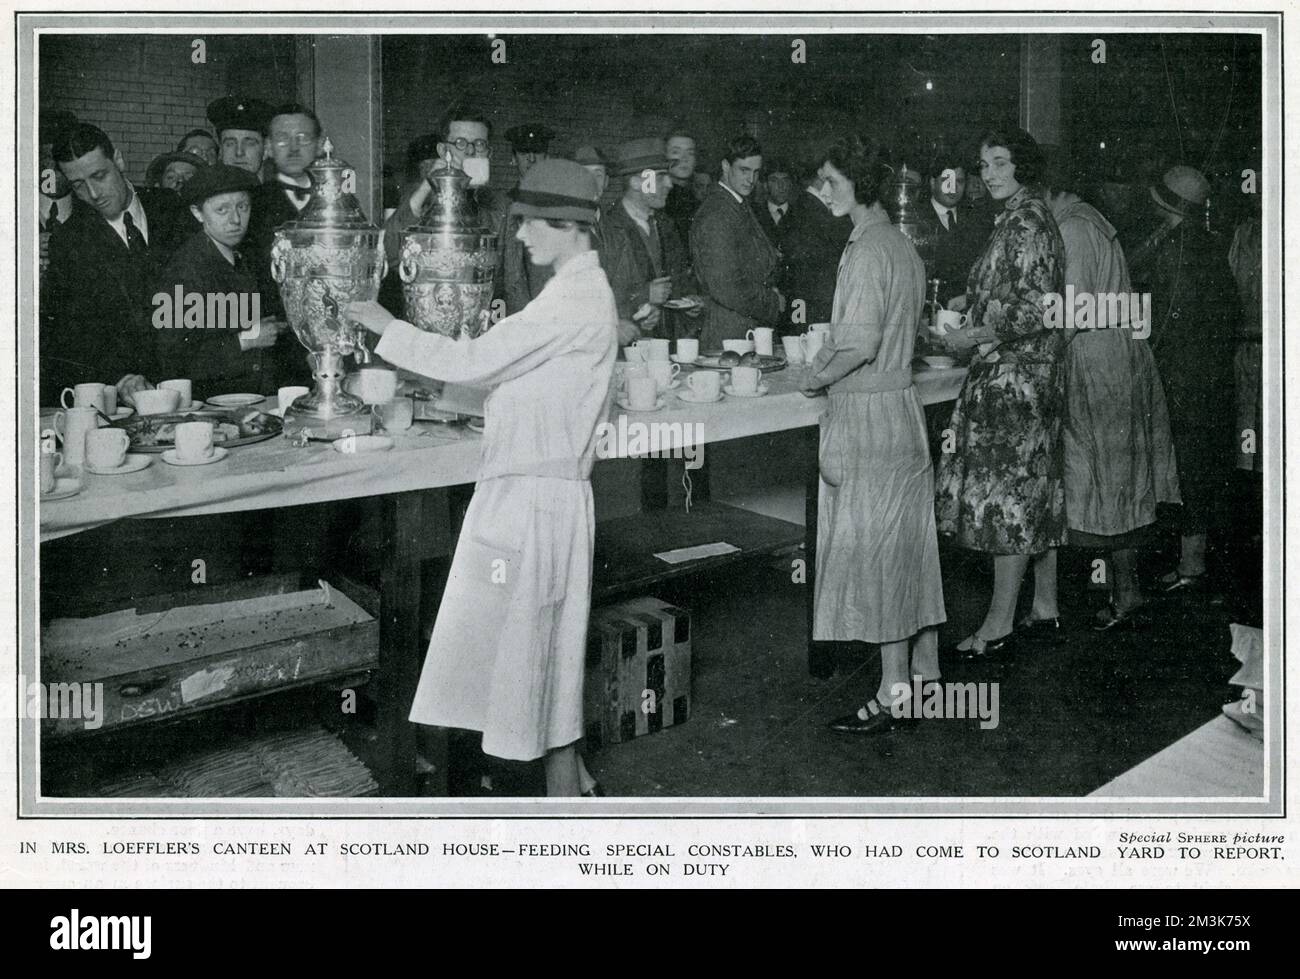 In Mrs Loeffler's canteen at Scotland House. Lady volunteers, including Lady Louis Mountbatten, feeding Special Constables, who had come to Scotland Yard to report, while on duty.  In support of a strike by coal miners over the issue of threatened wage cuts, the Trades Union Congress called a General Strike in early May 1926. The strike only involved certain key industrial sectors (docks, electricity, gas, railways) but, in the face of well-organised government emergency measures and lack of real public support, it collapsed after nine days.     Date: May 1926 Stock Photo